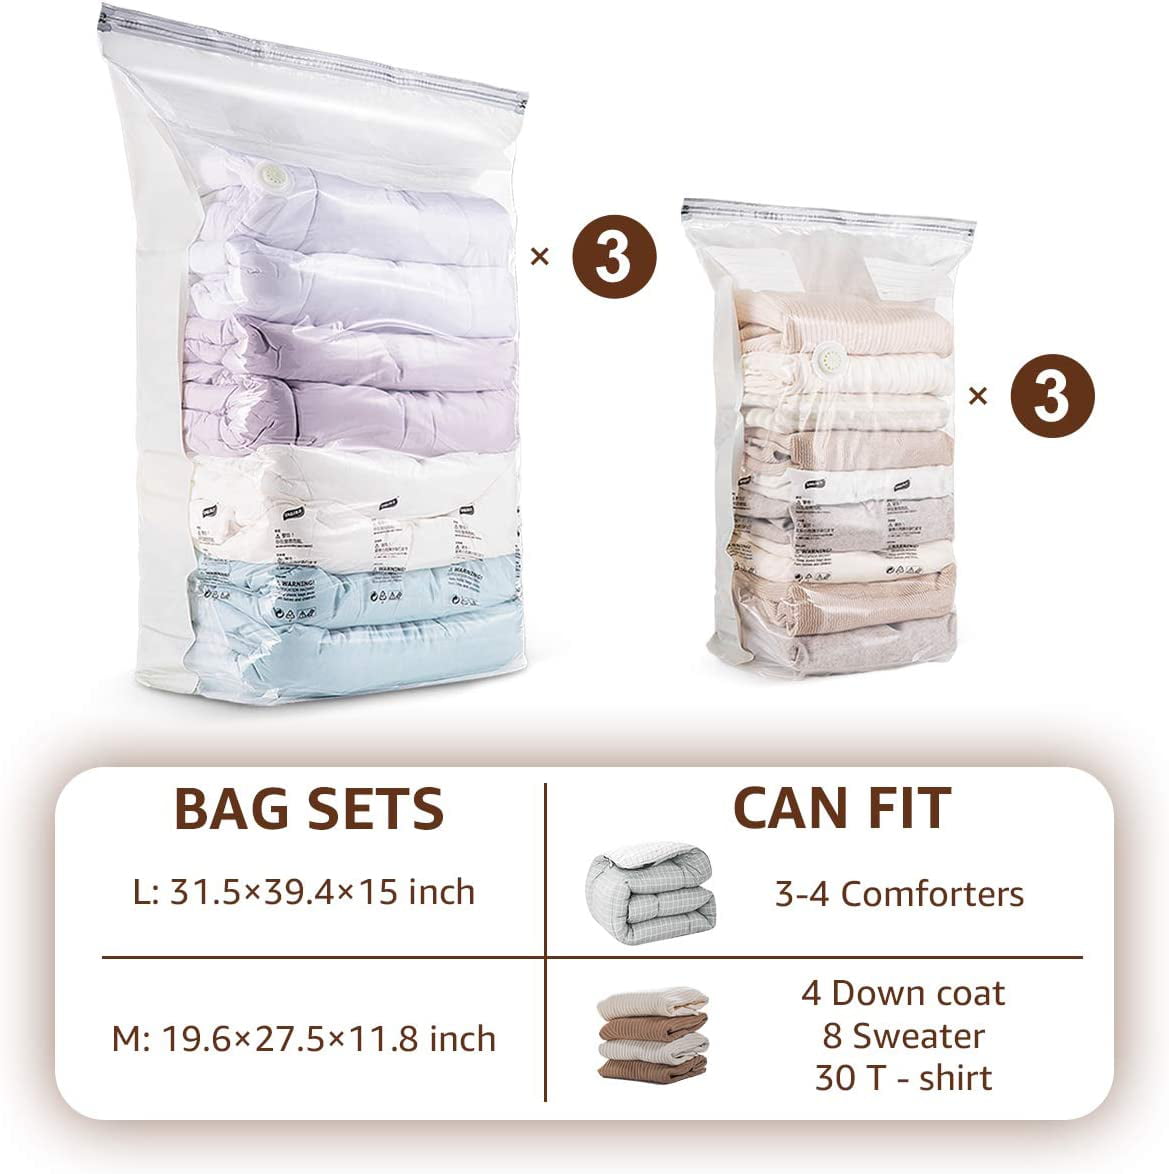 TAILI 6 Pack Vacuum Storage Bags, Space Saver Bags, Jumbo Cube 31x40x15  Inch, Extra Large Vacuum Sealer Bags for Comforters, Blankets, Bedding